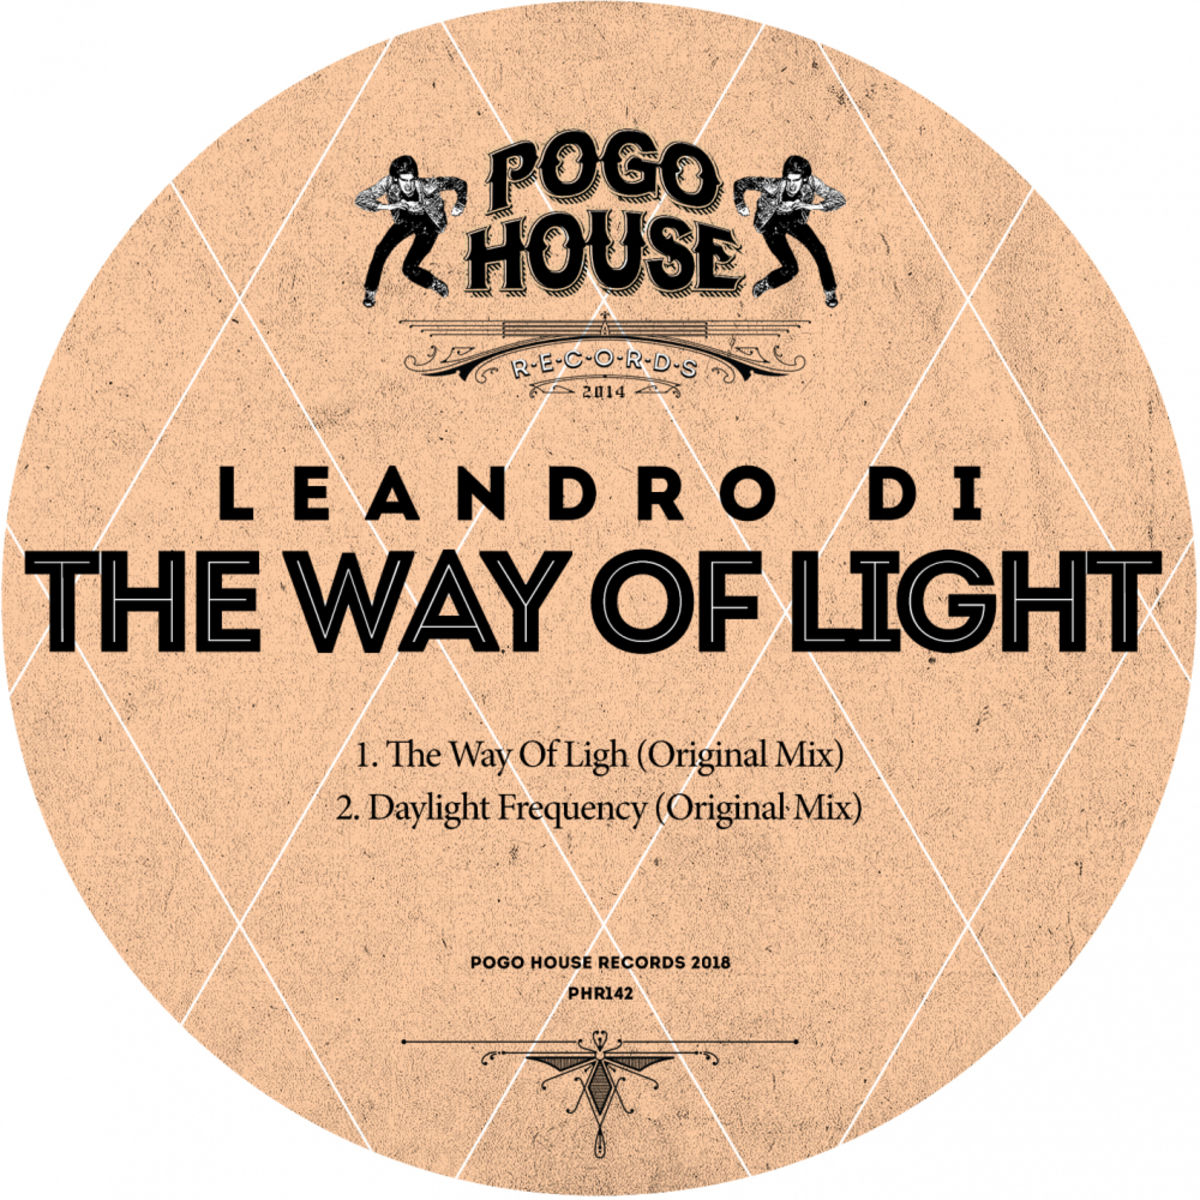 Leandro Di - The Way Of Light / Pogo House Records